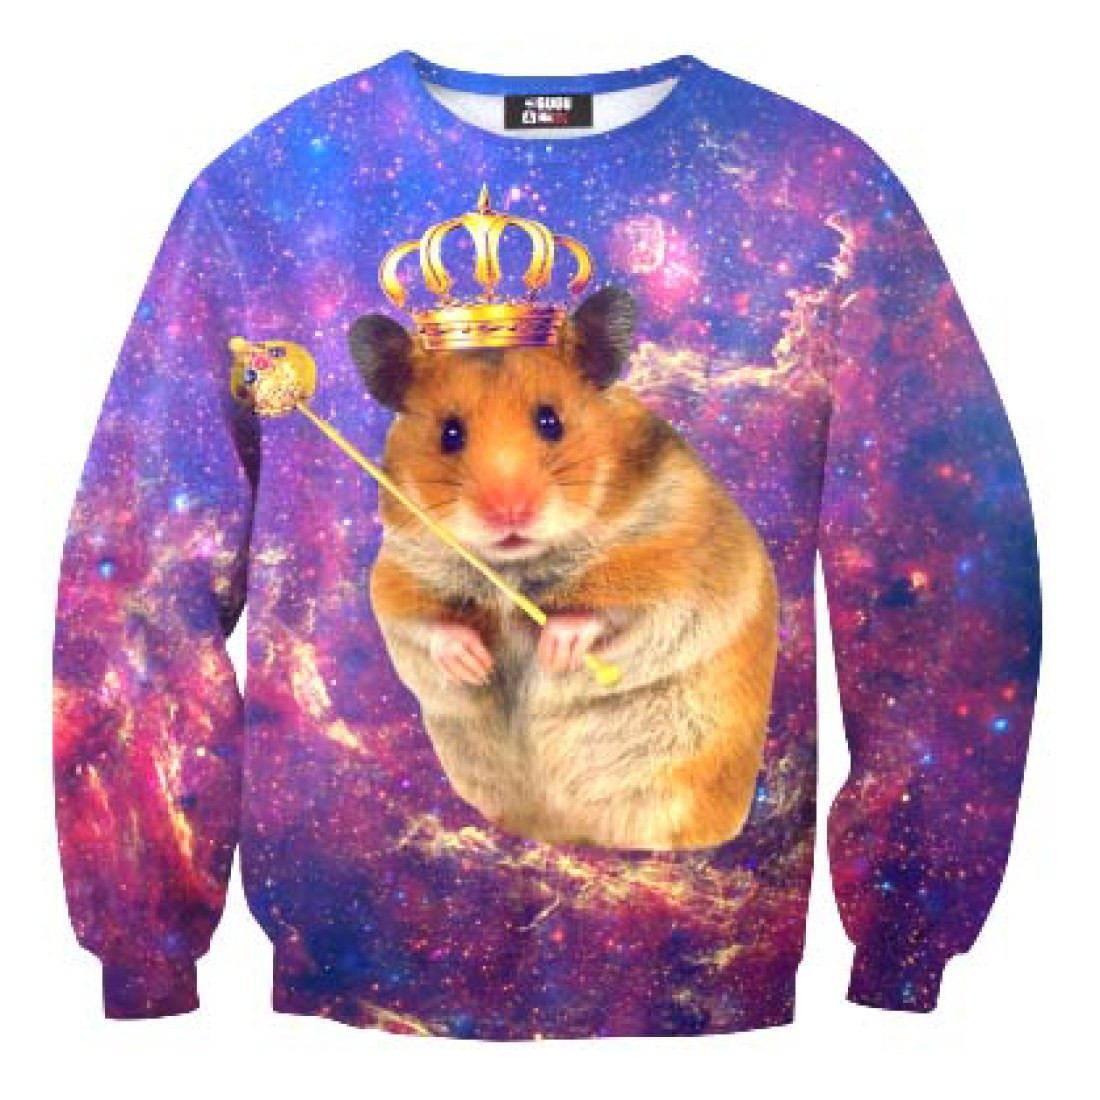 I luv this hamster T-Shirt! Looks good for Halloween!
#CutebutSpooky